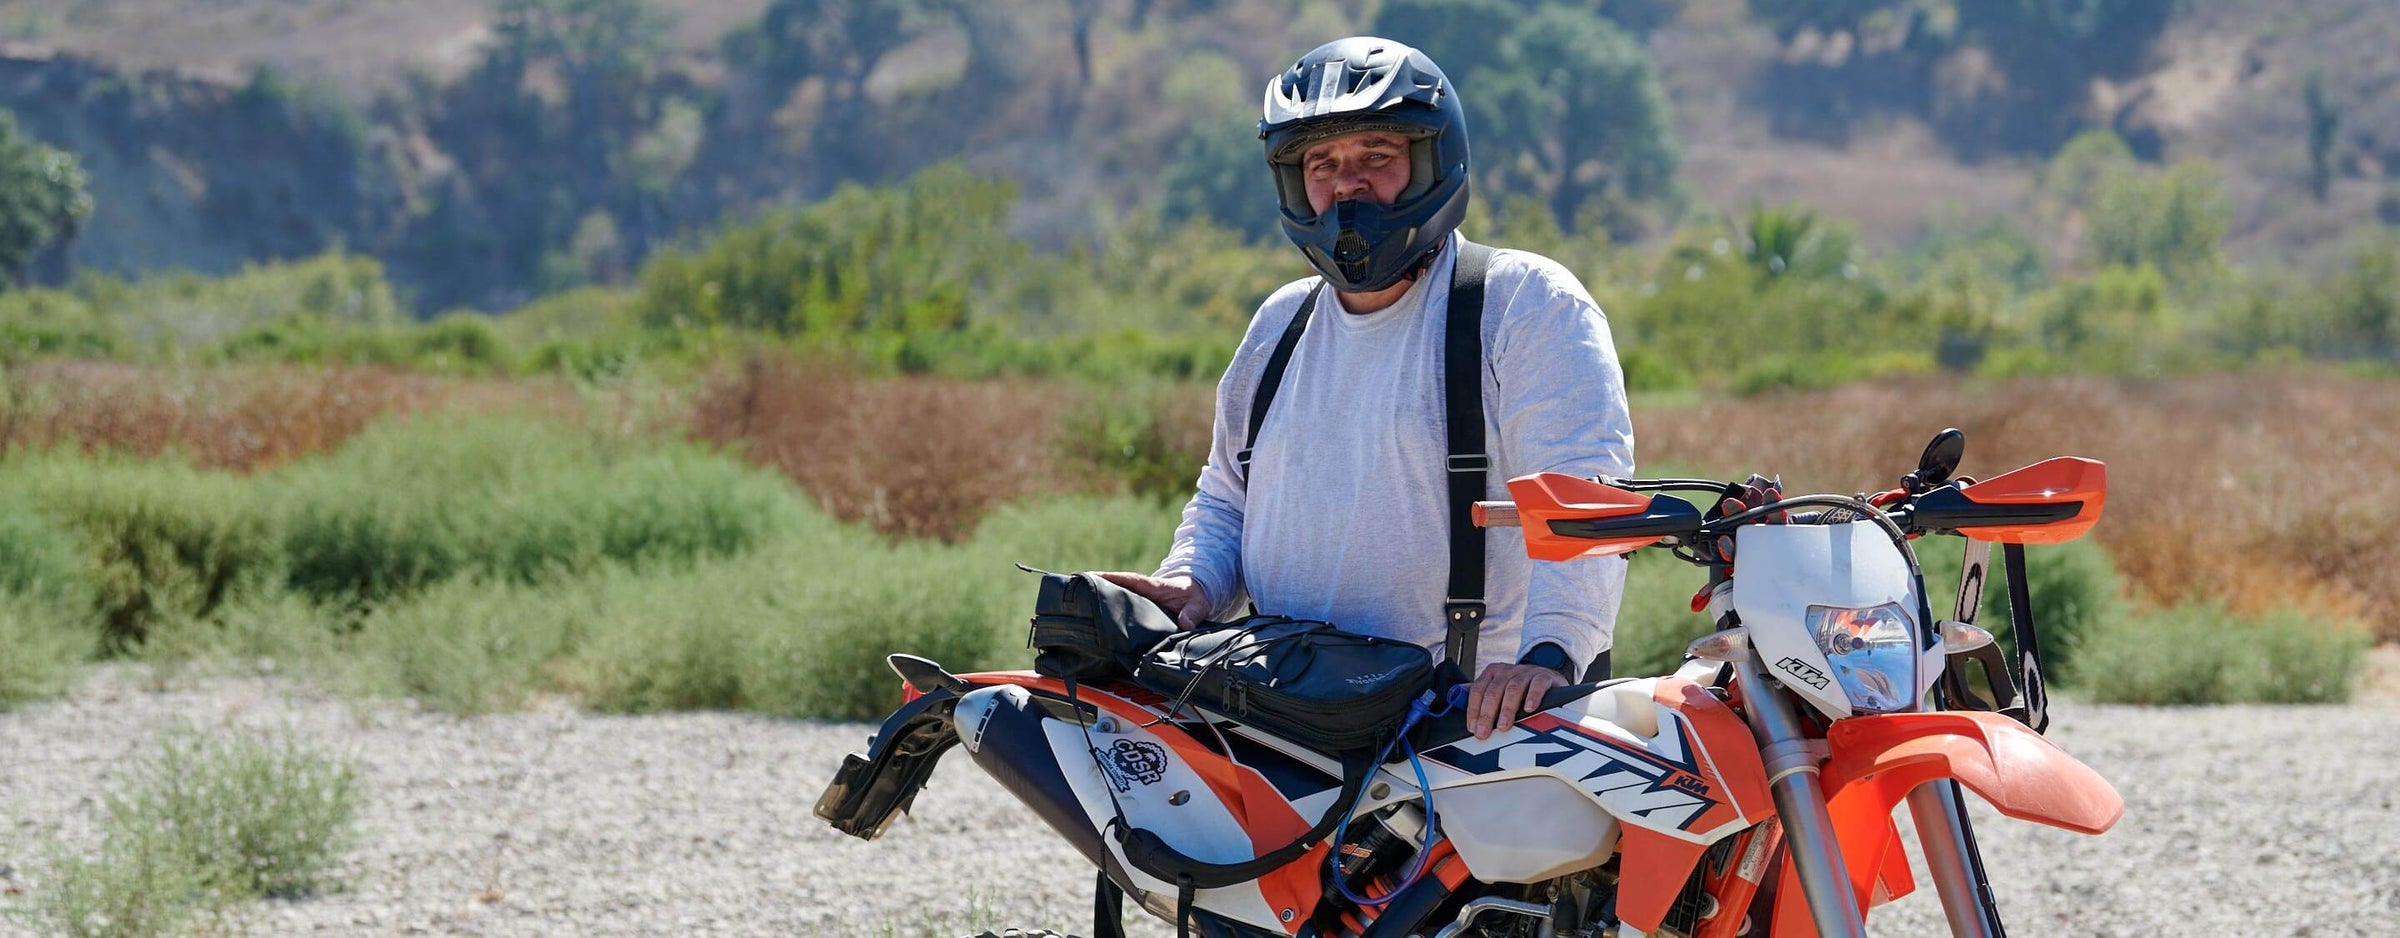 Chris Compton Founder & CEO of Clydesdale Gear standing off to the side of his motorcycle looking at the camera with the Enduro Pack laying on the seat of the motorcycle.